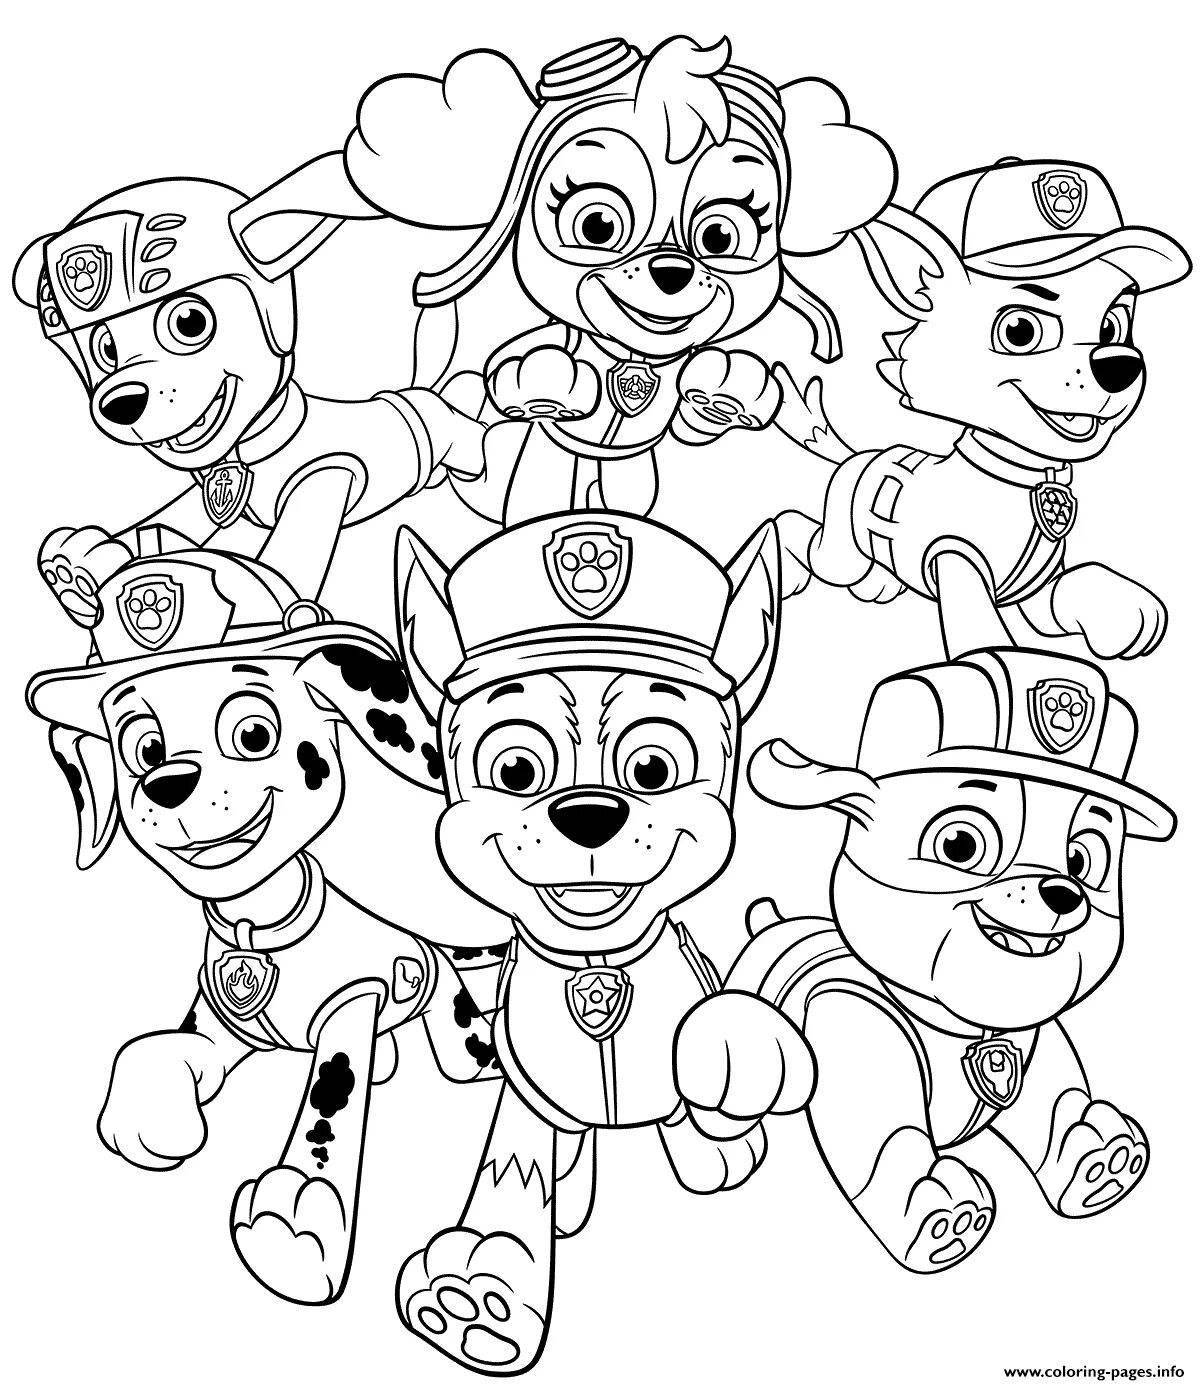 Puppy Patrol coloring book for kids 5-6 years old